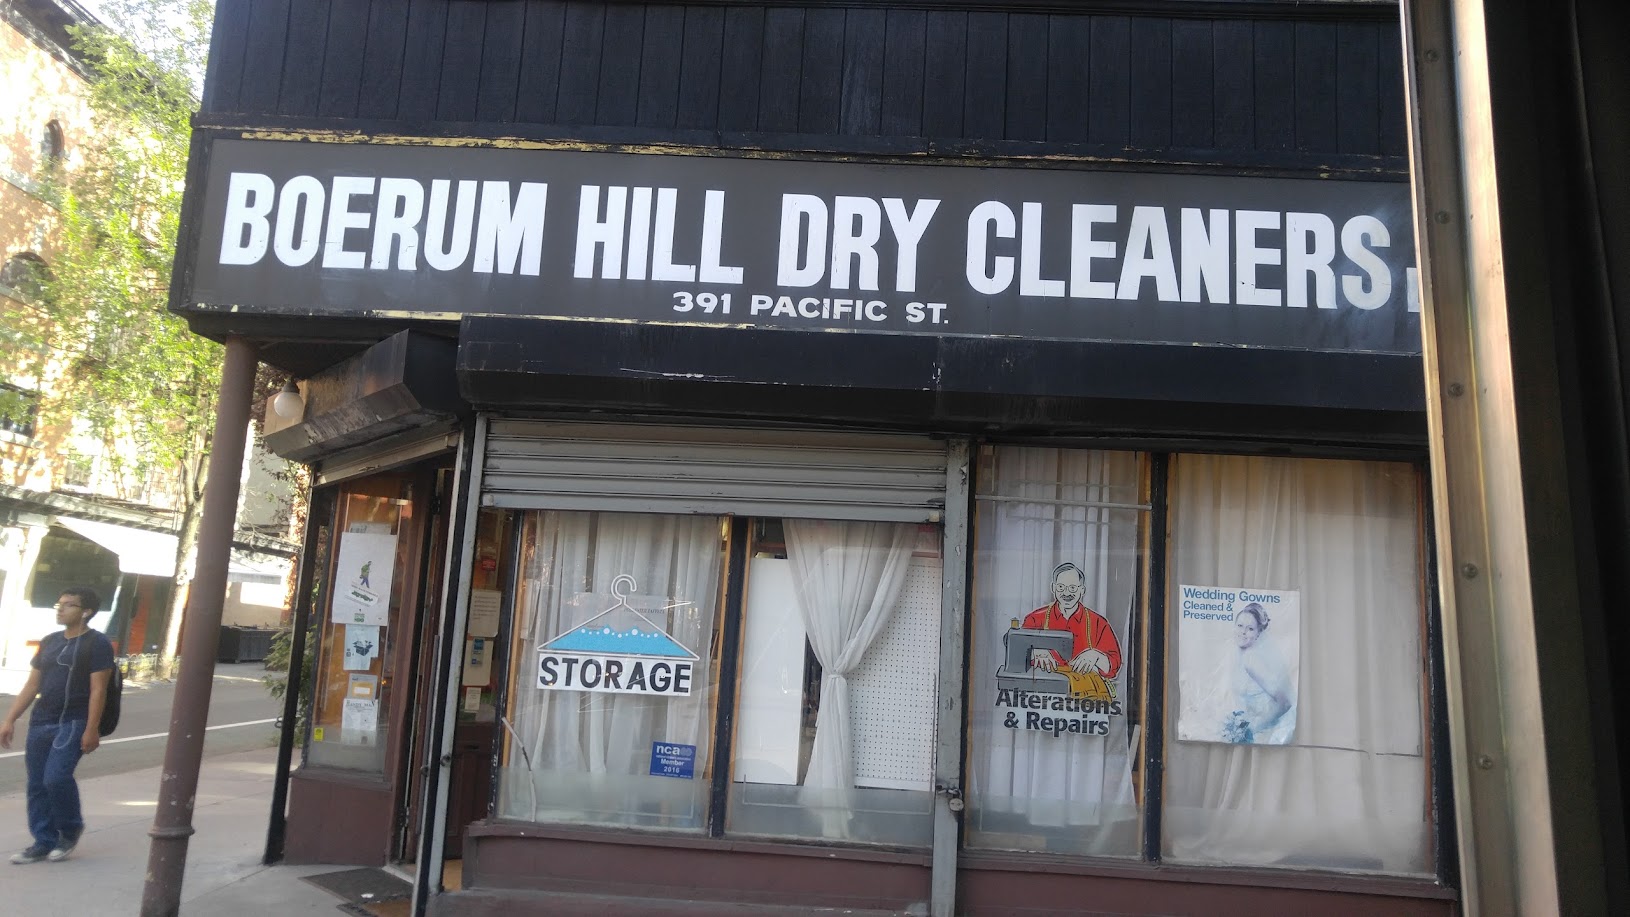 Boerum Hill Dry Cleaners